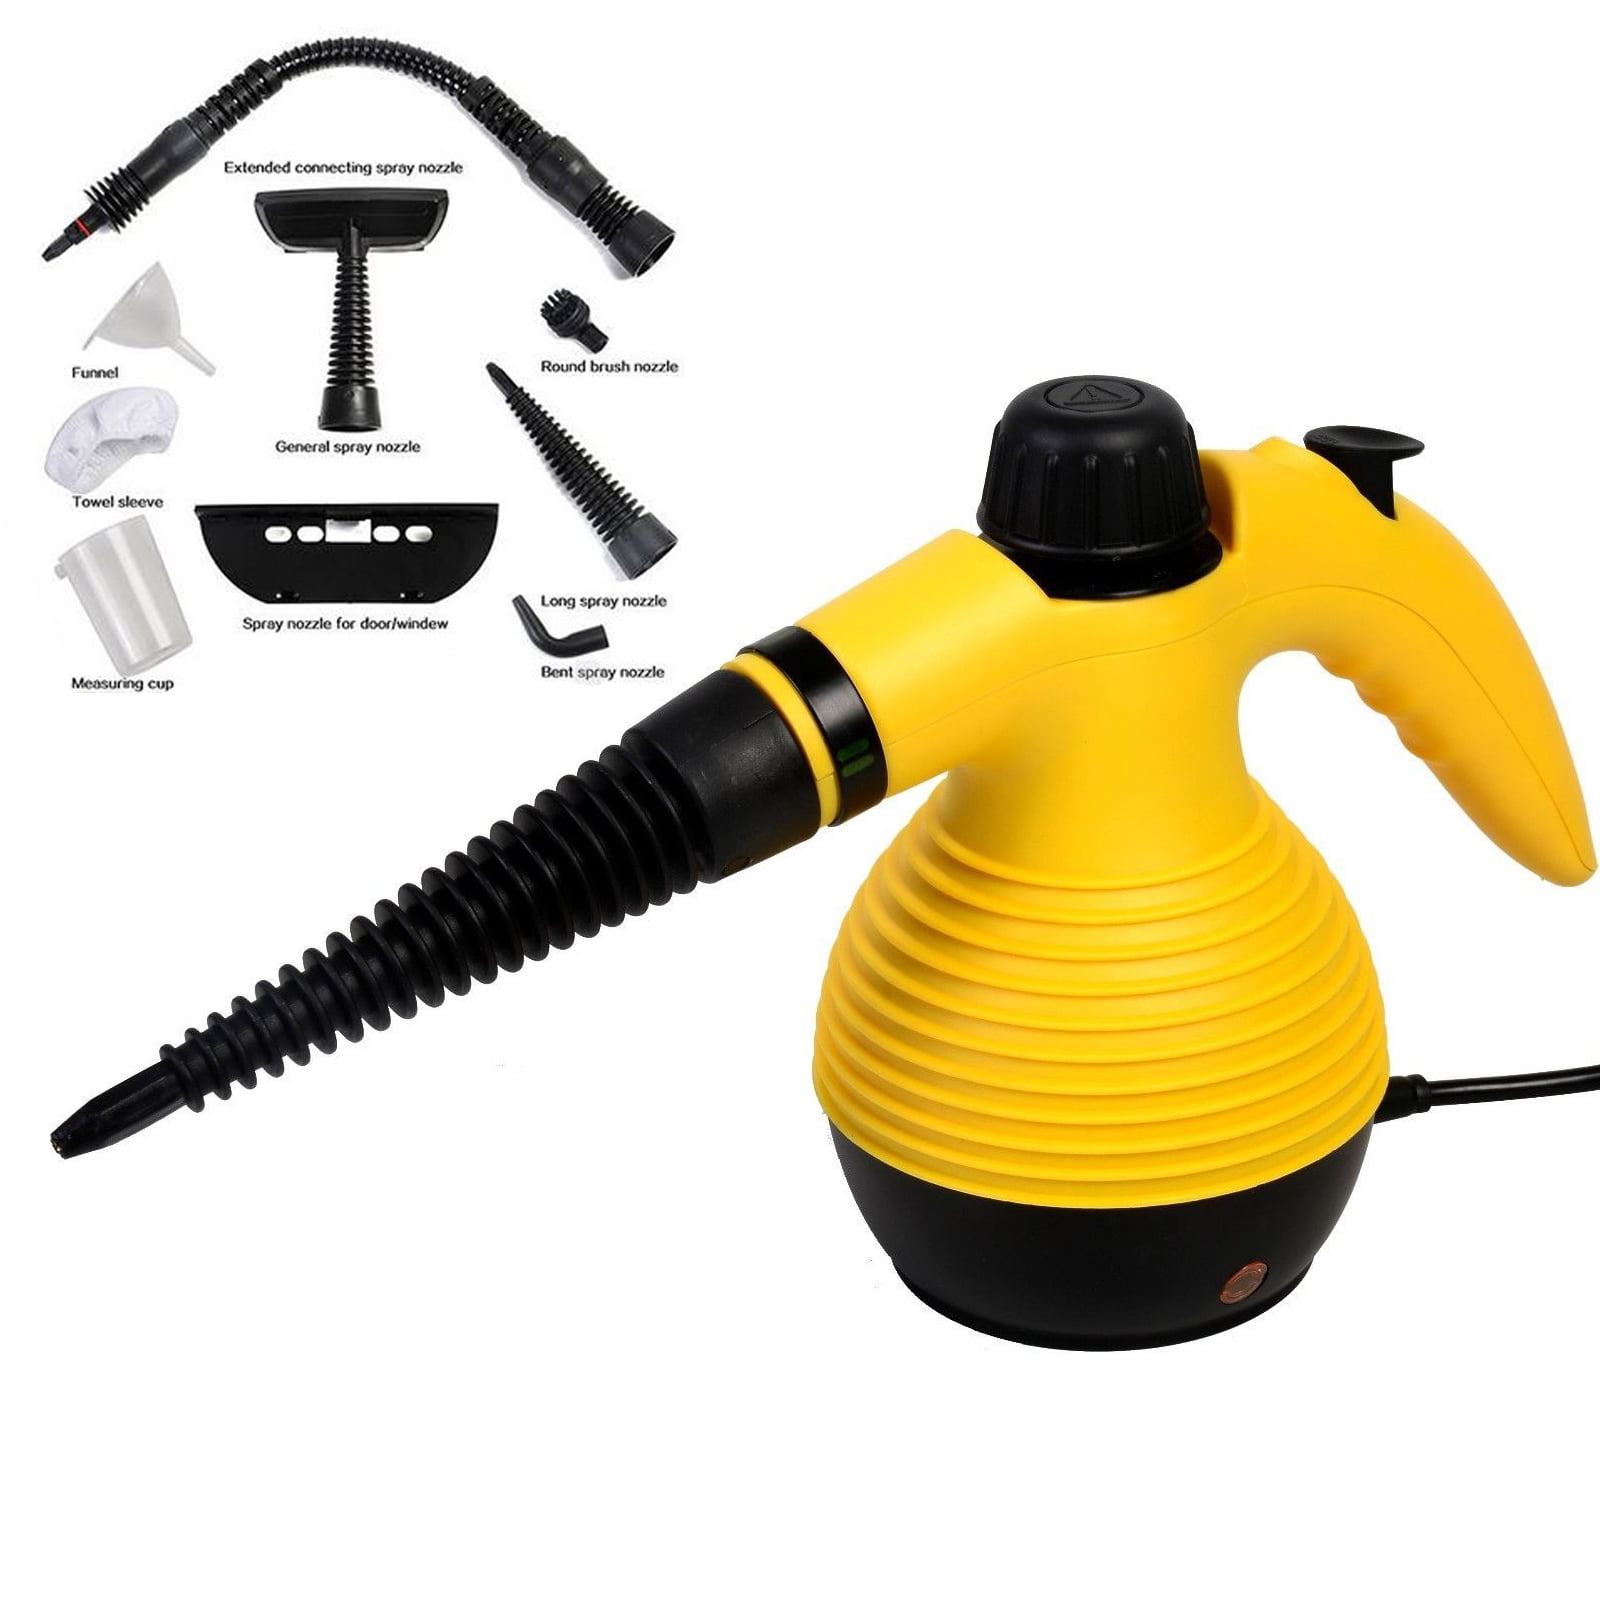 Steam Cleaner Hand Held Steamer Kitchen Bathroom Tile Universal Cleaning Yellow 